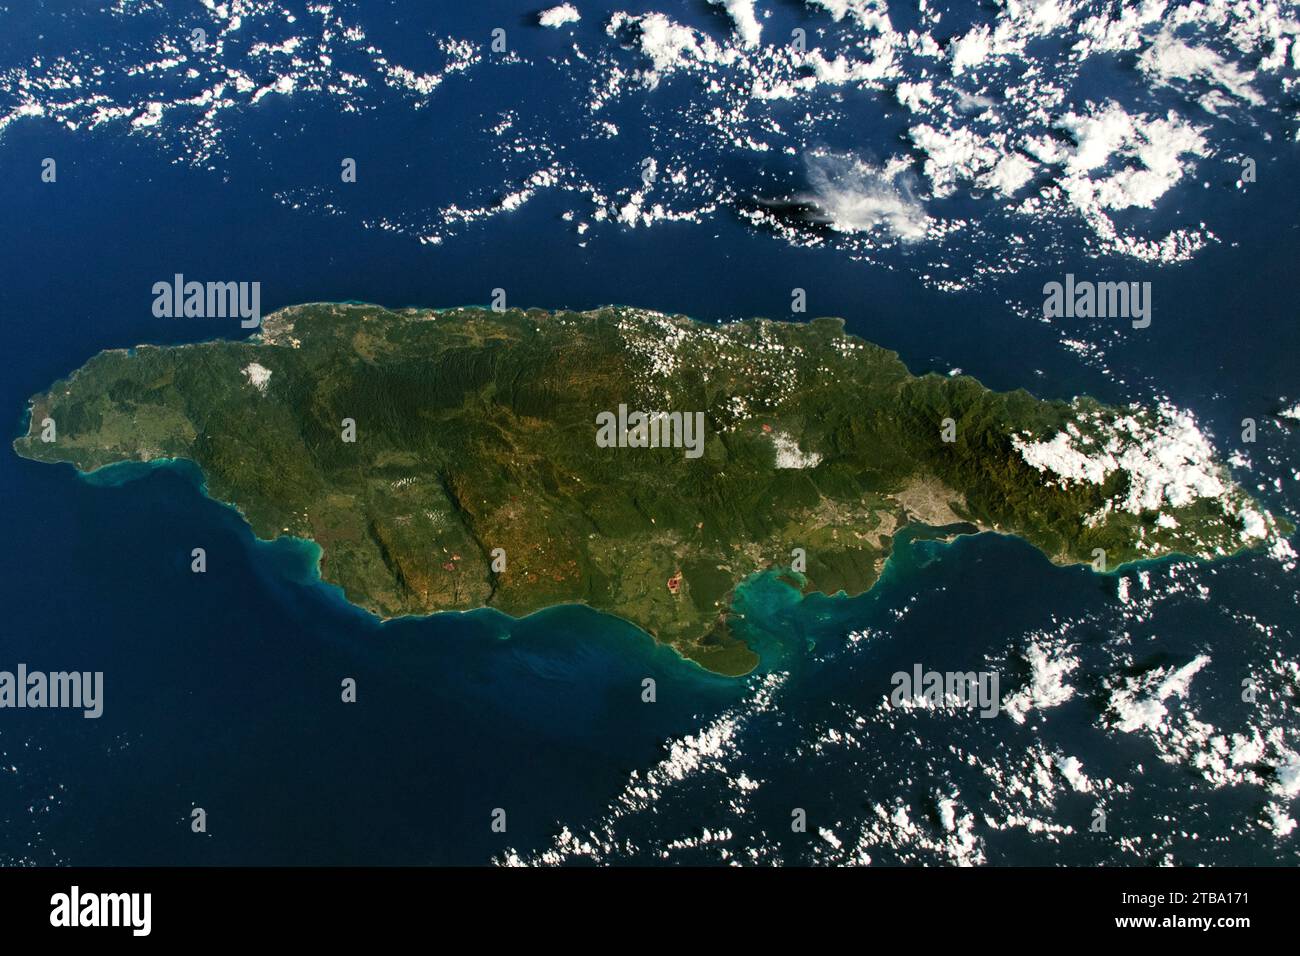 View from space of the island of Jamaica. Stock Photo